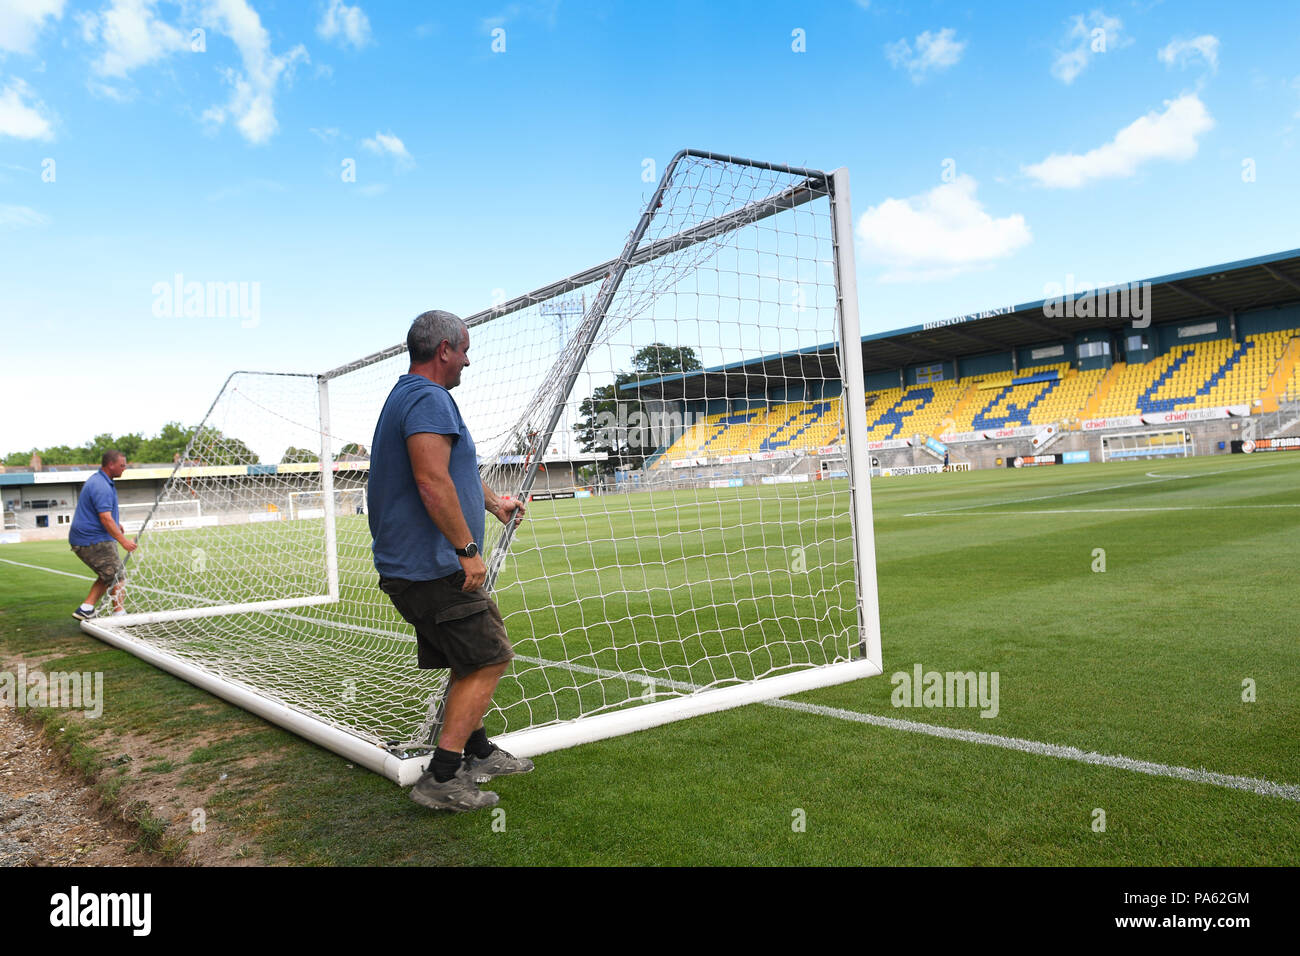 A general view of Plainmoor, Torquay. PRESS ASSOCIATION Photo. Picture date: Friday July 20, 2018. Photo credit should read: Simon Galloway/PA Wire. No use with unauthorised audio, video, data, fixture lists, club/league logos or 'live' services. Online in-match use limited to 75 images, no video emulation. No use in betting, games or single club/league/player publications. Stock Photo